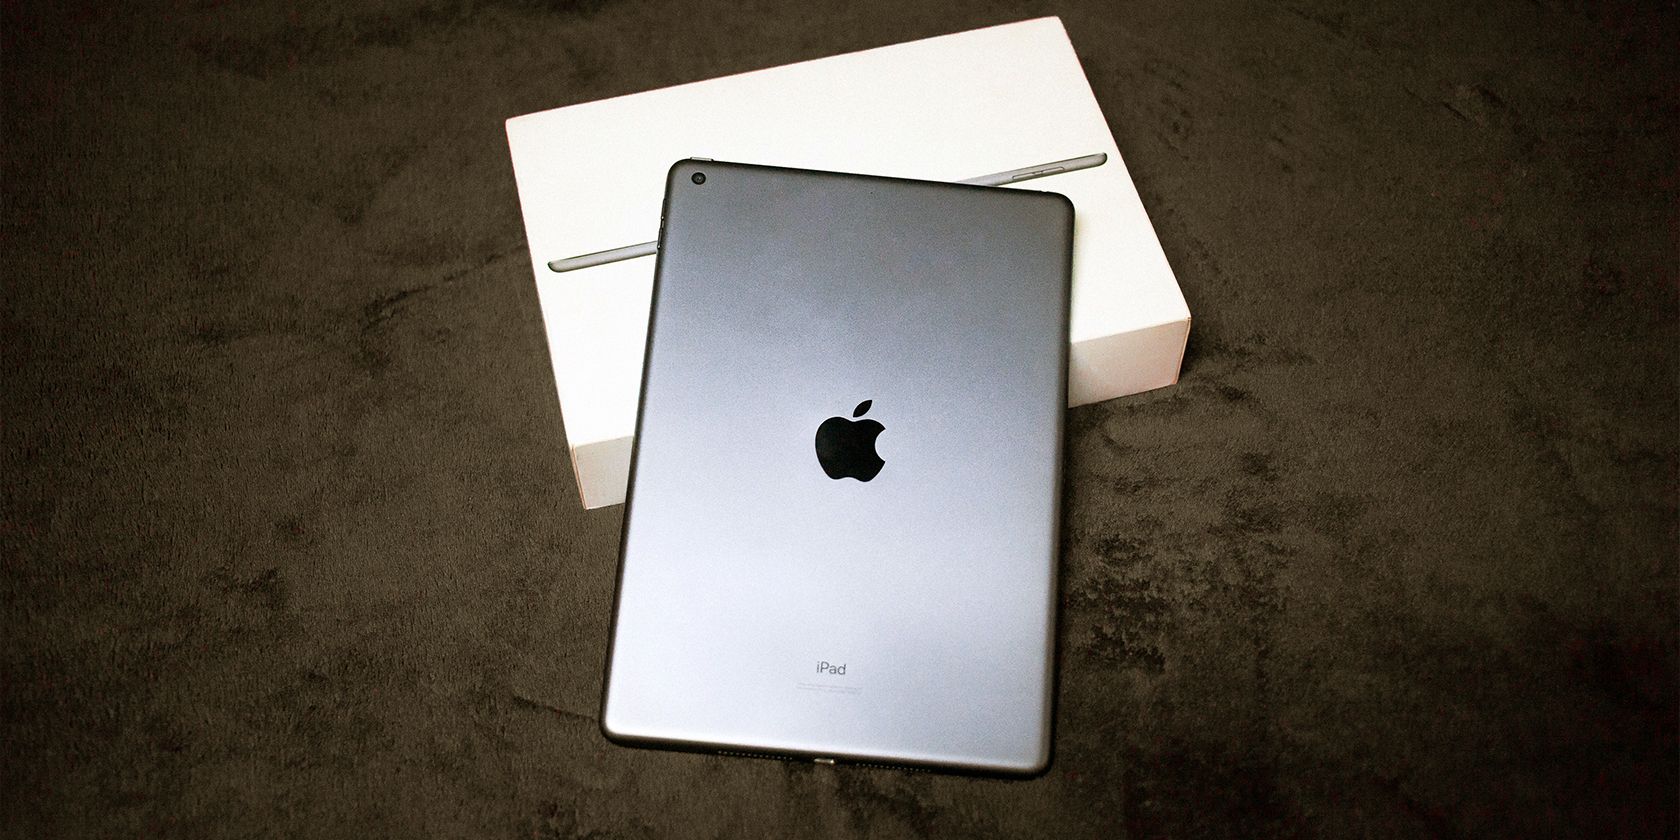 iPad and box for sale